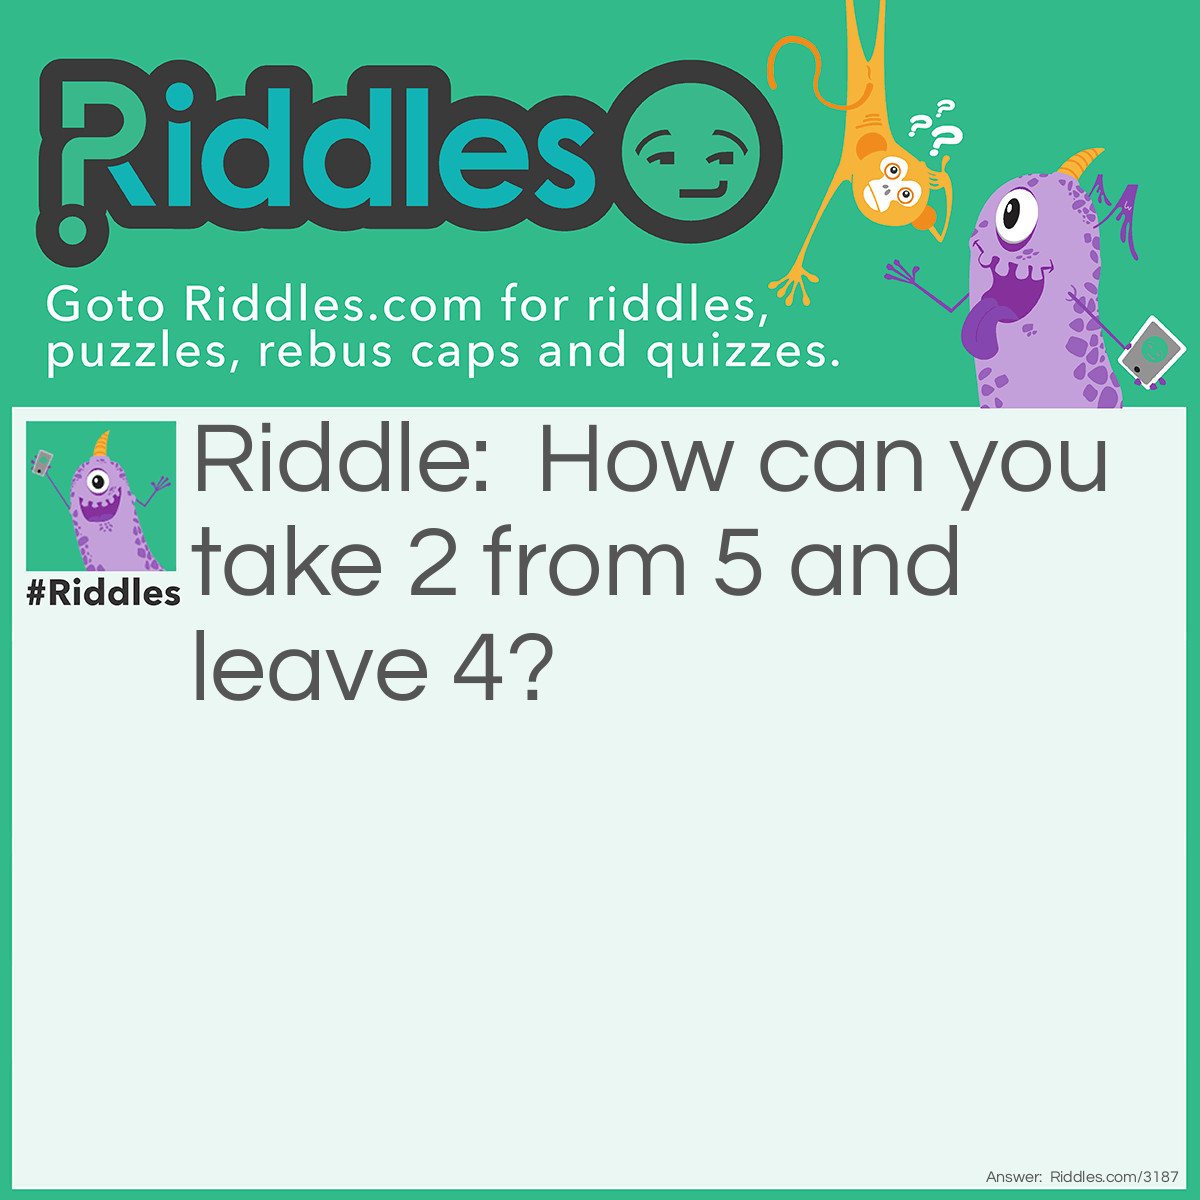 Riddle: How can you take 2 from 5 and leave 4? Answer: F  I V  E
Remove the 2 letters F and E from five and you have IV which is the Roman numeral for four.